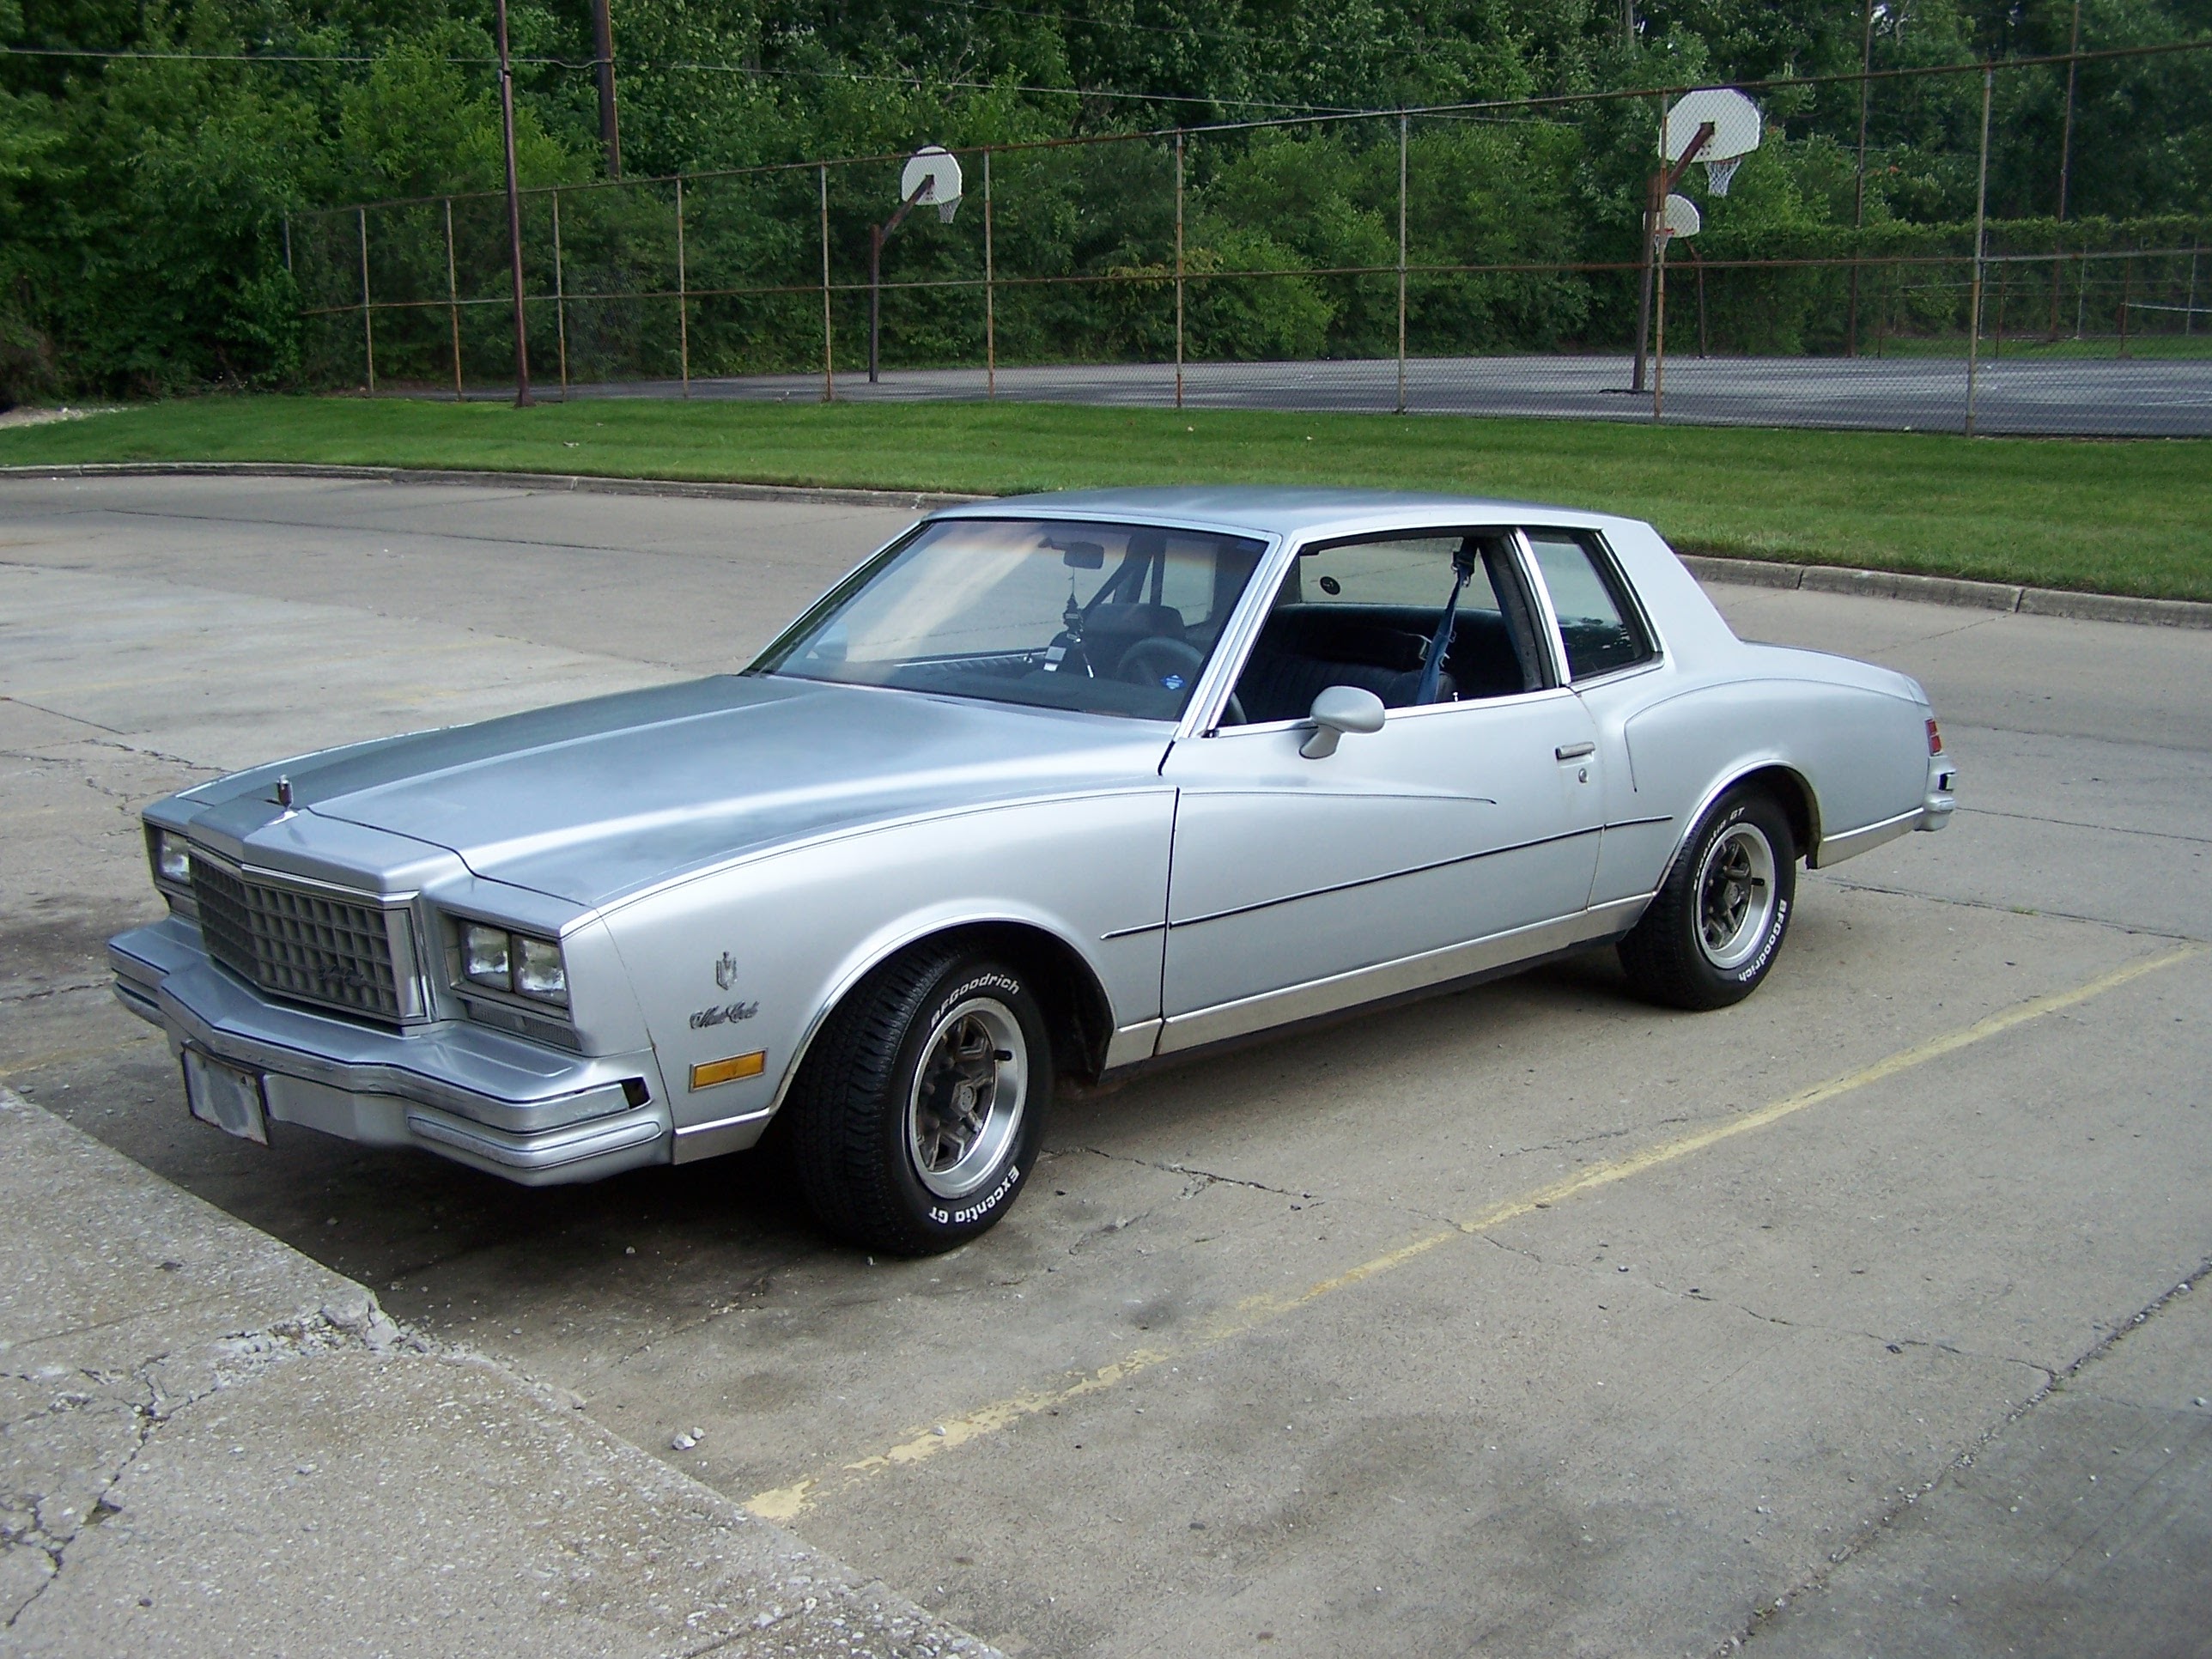 My 1980 Monte Carlo.  I've owned this one since 1994